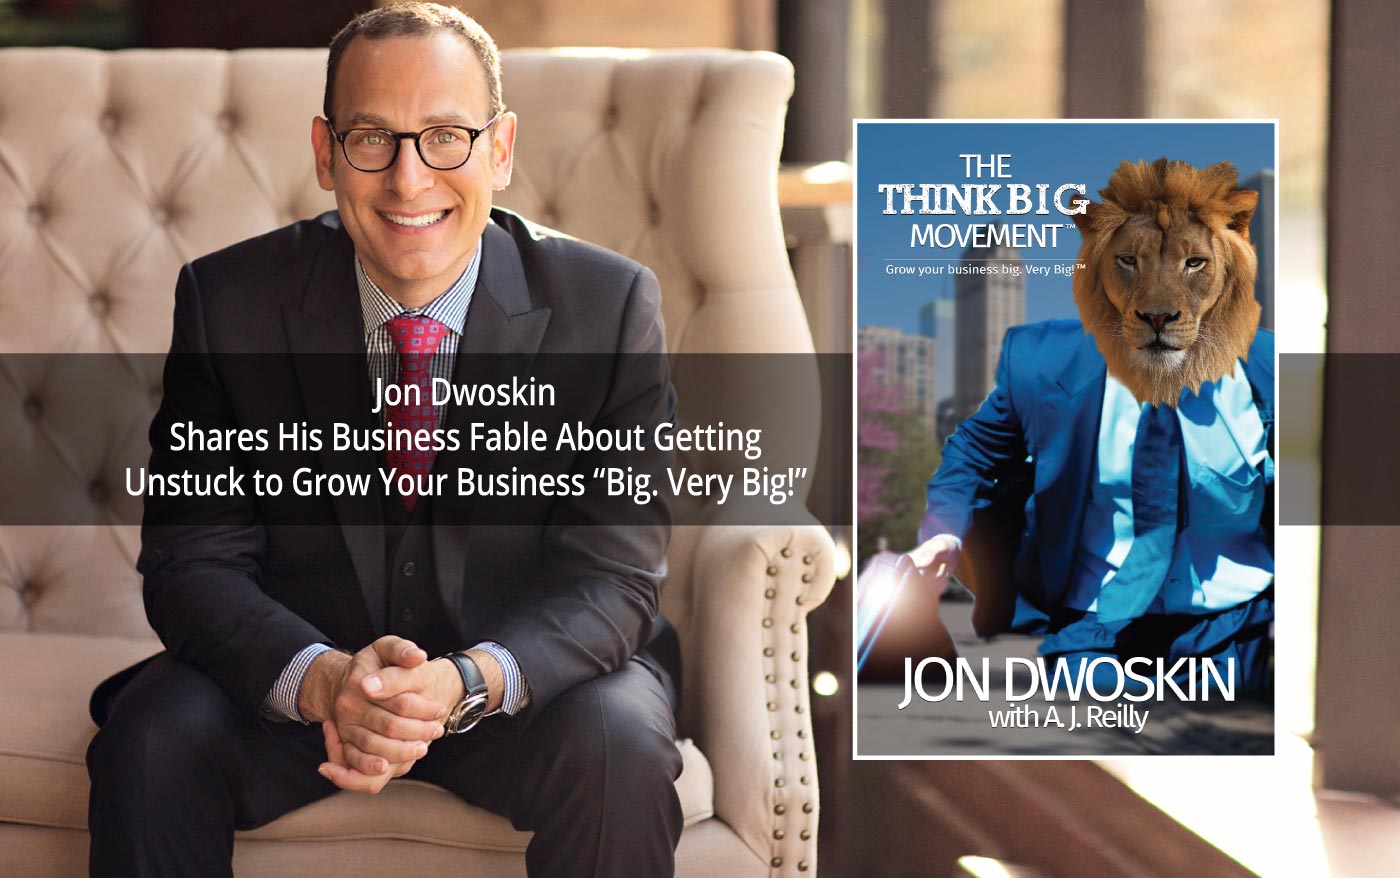 Jon Dwoskin Shares His Business Fable Book: The Think Big Movement